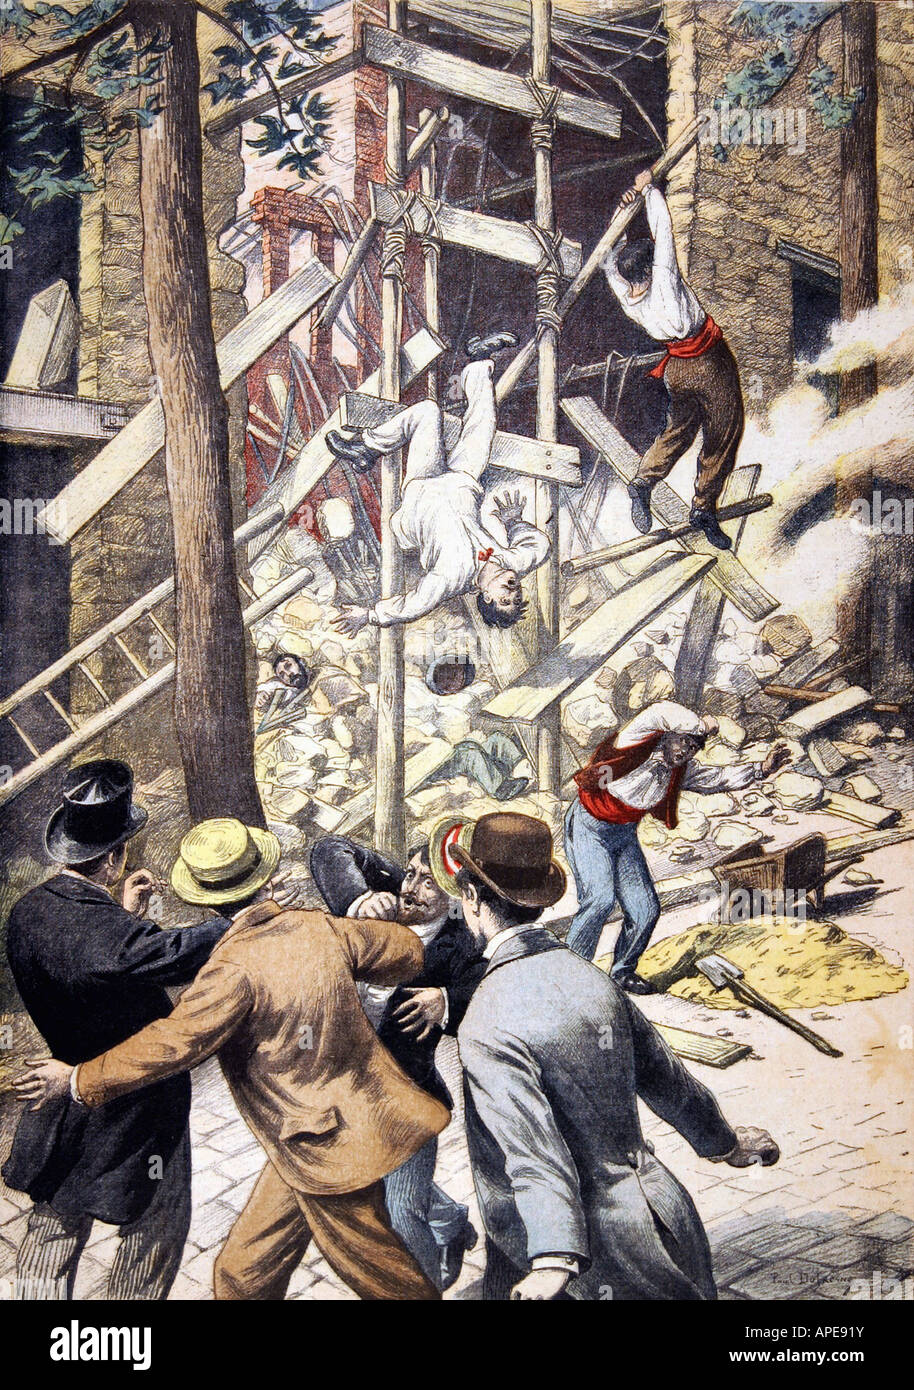 press/media, magazines, 'Le Petit Journal', Paris, 13 volume, number 618, illustrated supplement, Sunday 21 September 1902, illustration, 'In Rosny-sous-Bois a scaffolding is collapsing, eight workers are injured', , Stock Photo